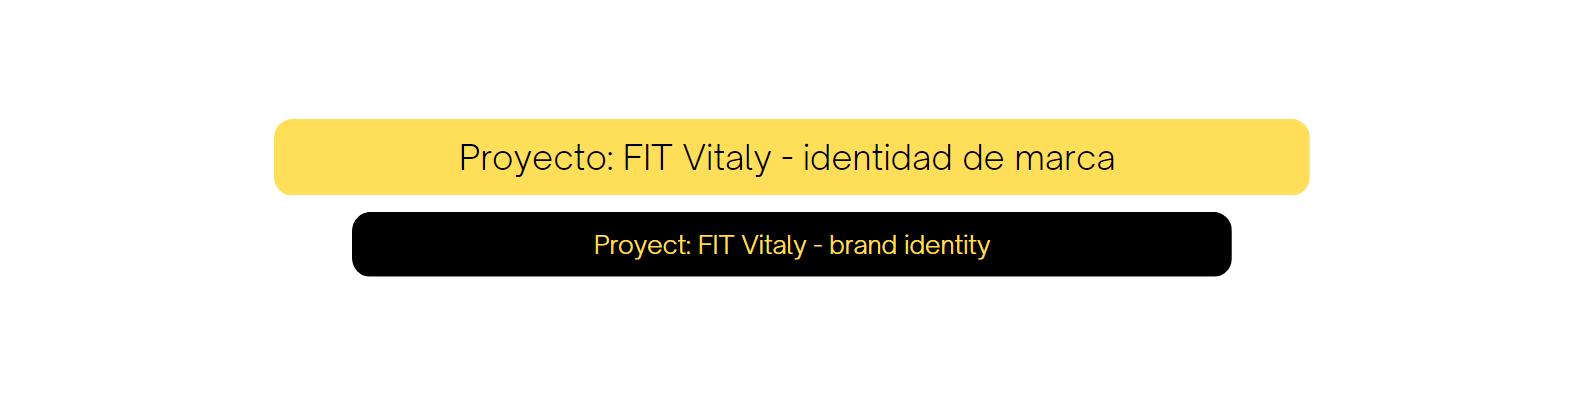 Proyecto: FIT Vitaly - identidad de marca

Proyect: FIT Vitaly - brand identity